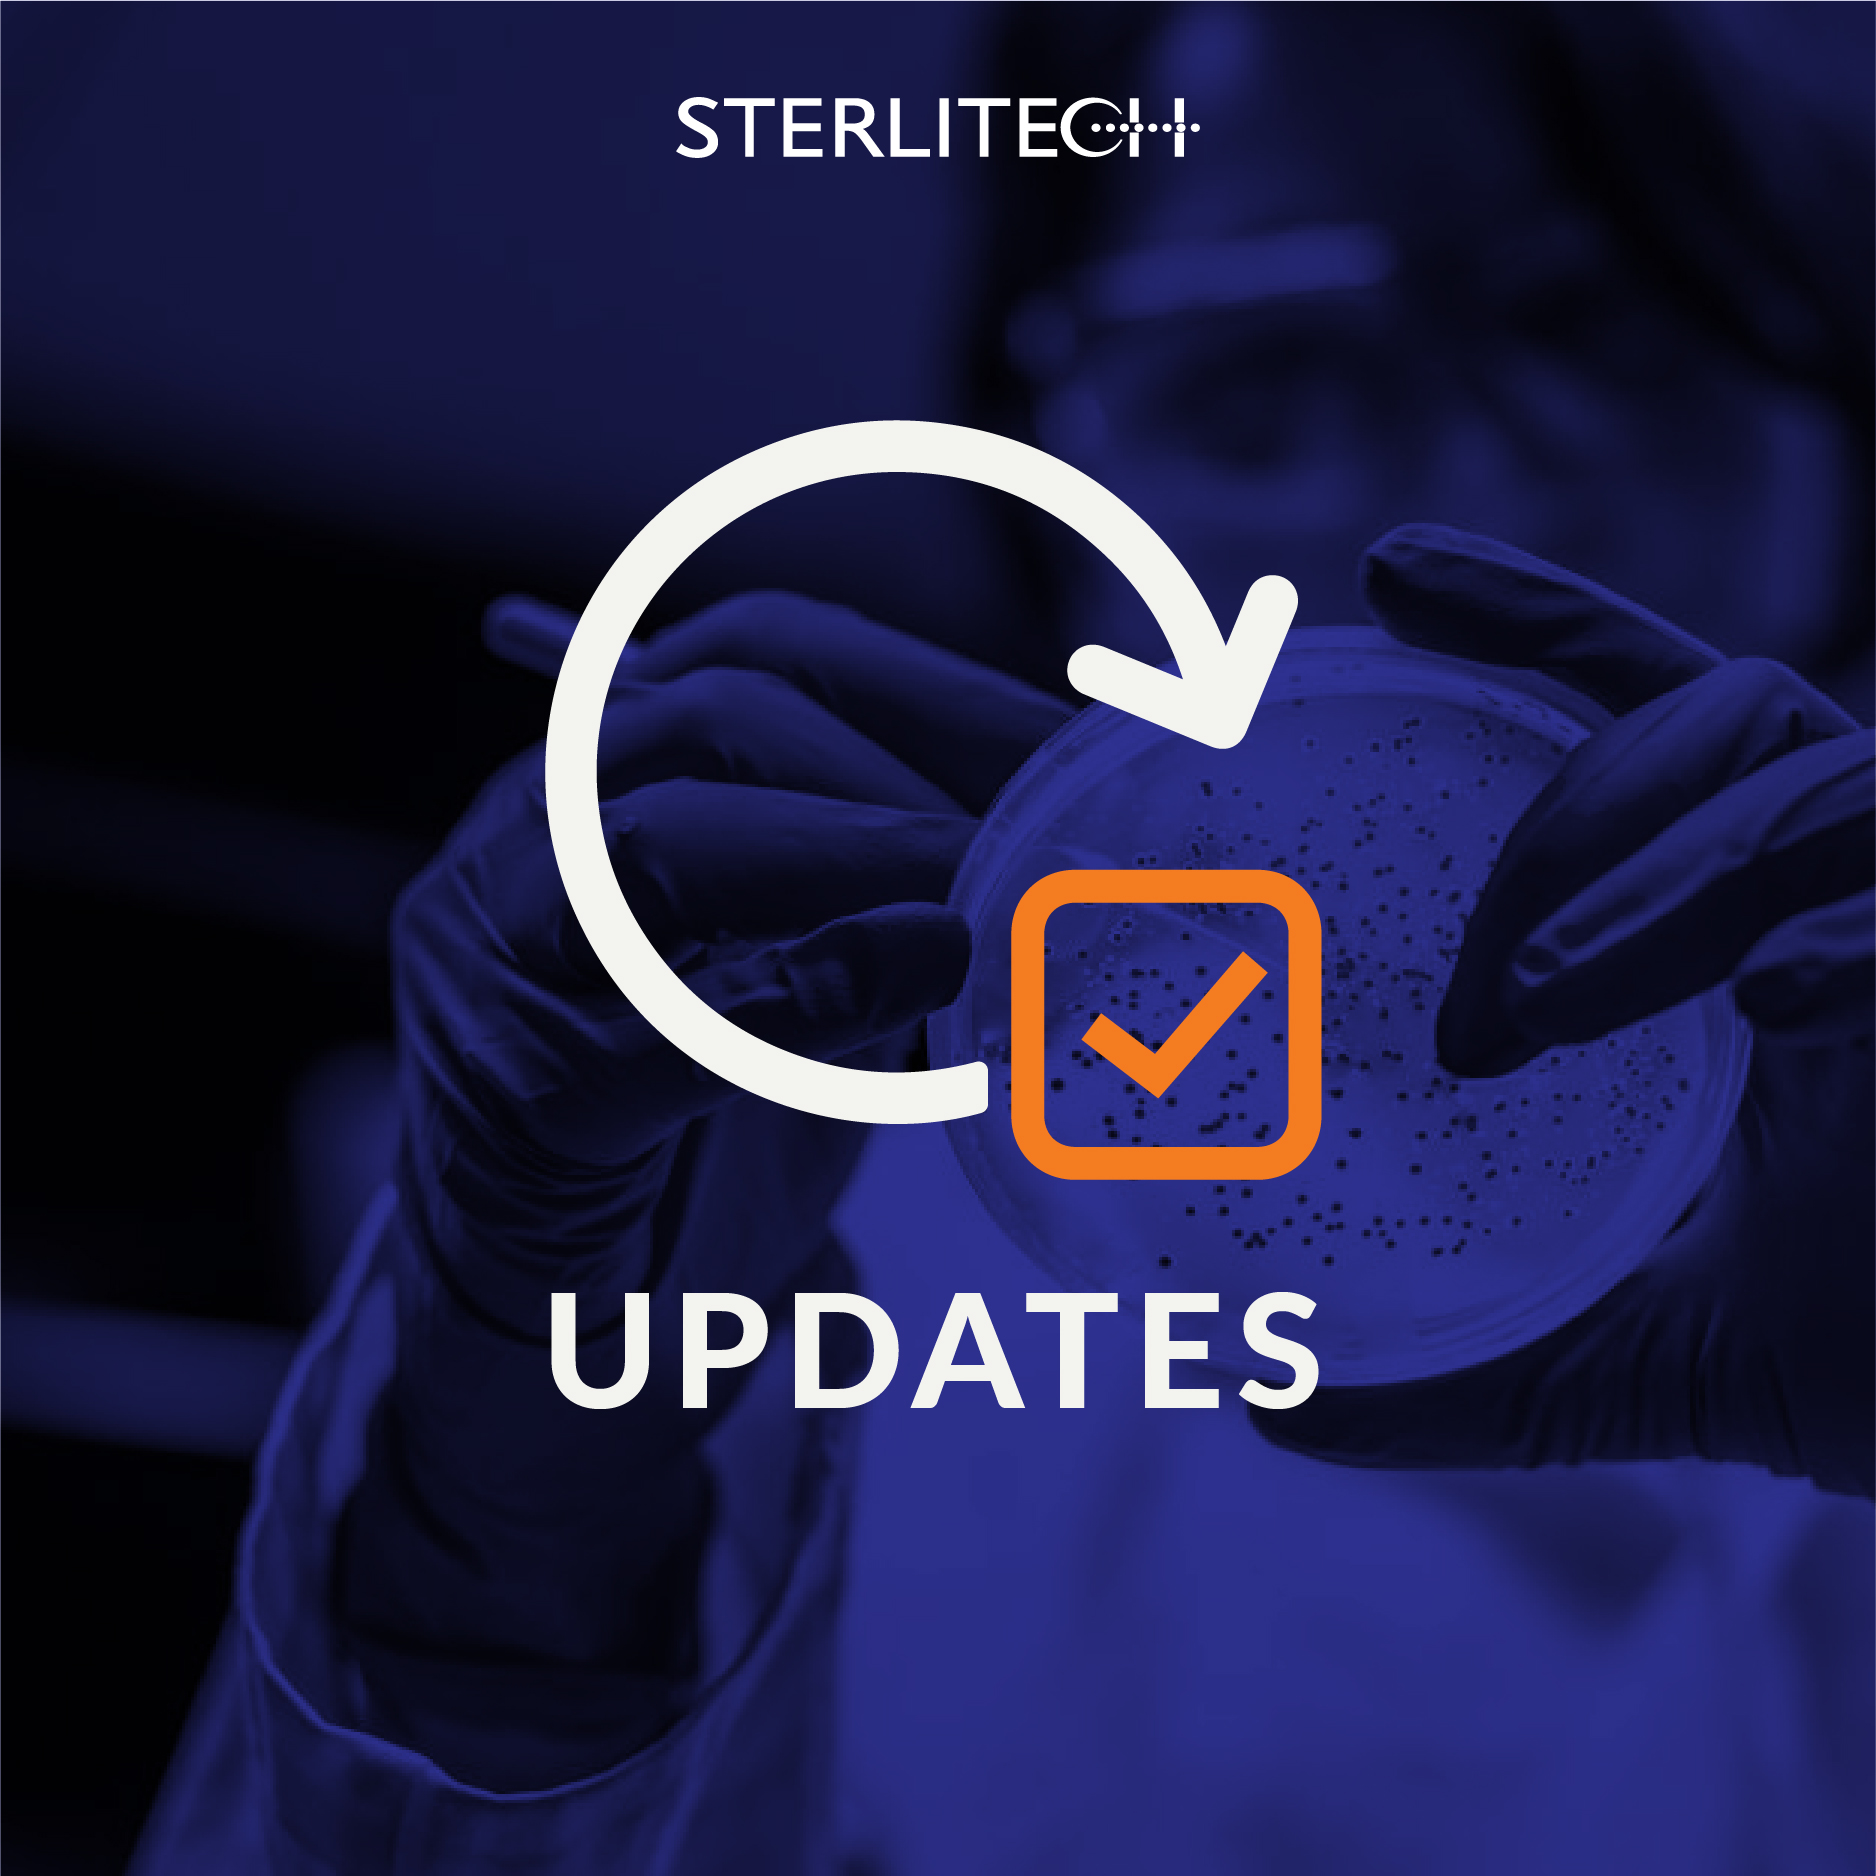 Sterlitech Bench Scale Customer in the News!